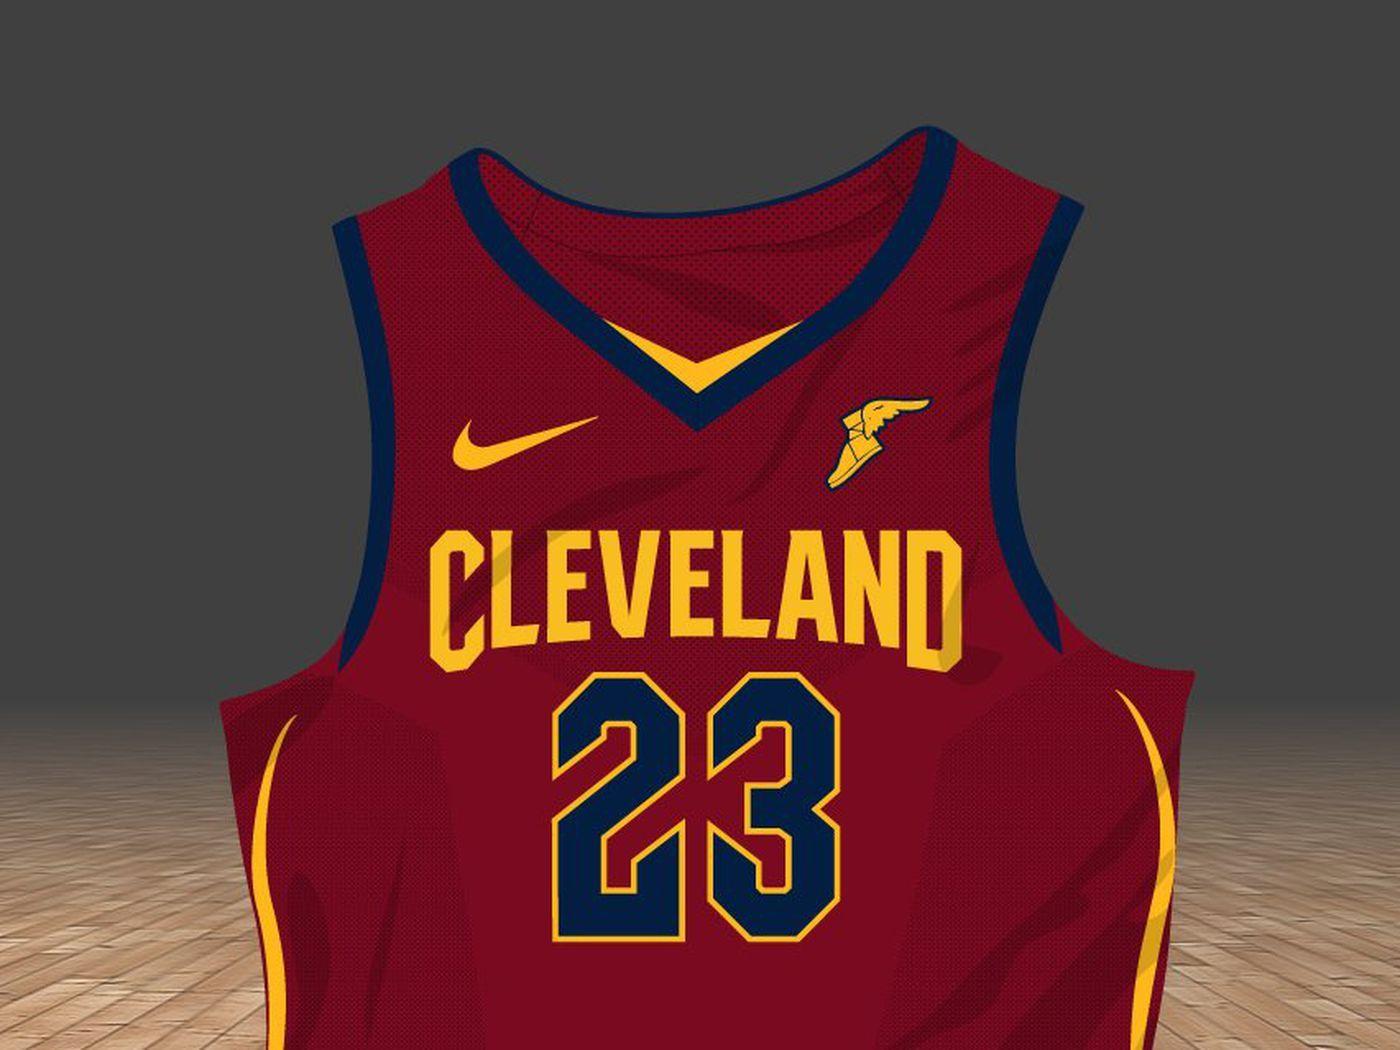 Here's a first look at the Cavs' new jerseys The Sword